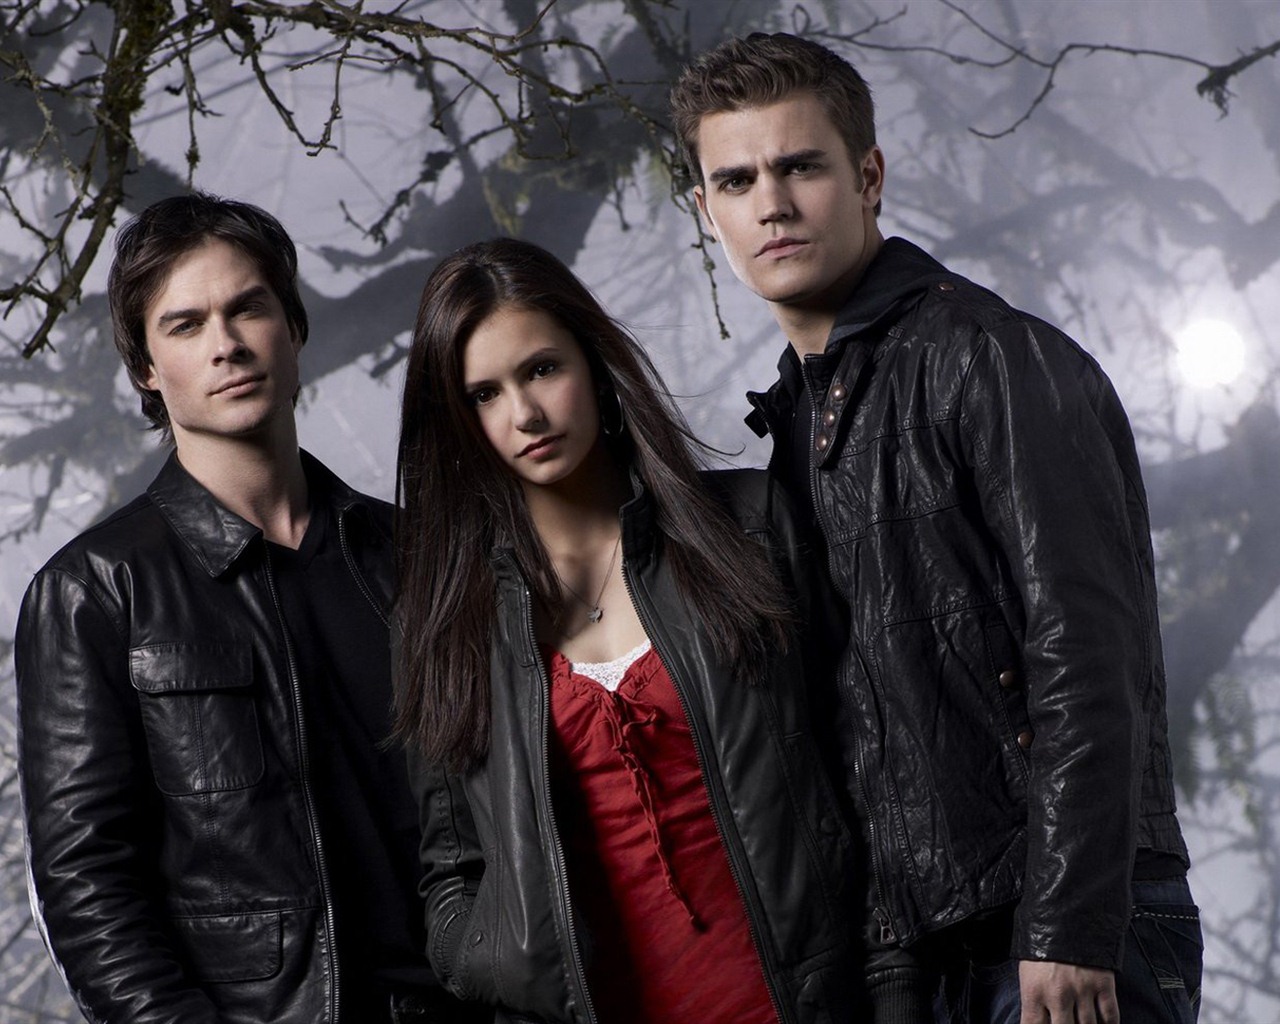 The Vampire Diaries HD Wallpapers #3 - 1280x1024